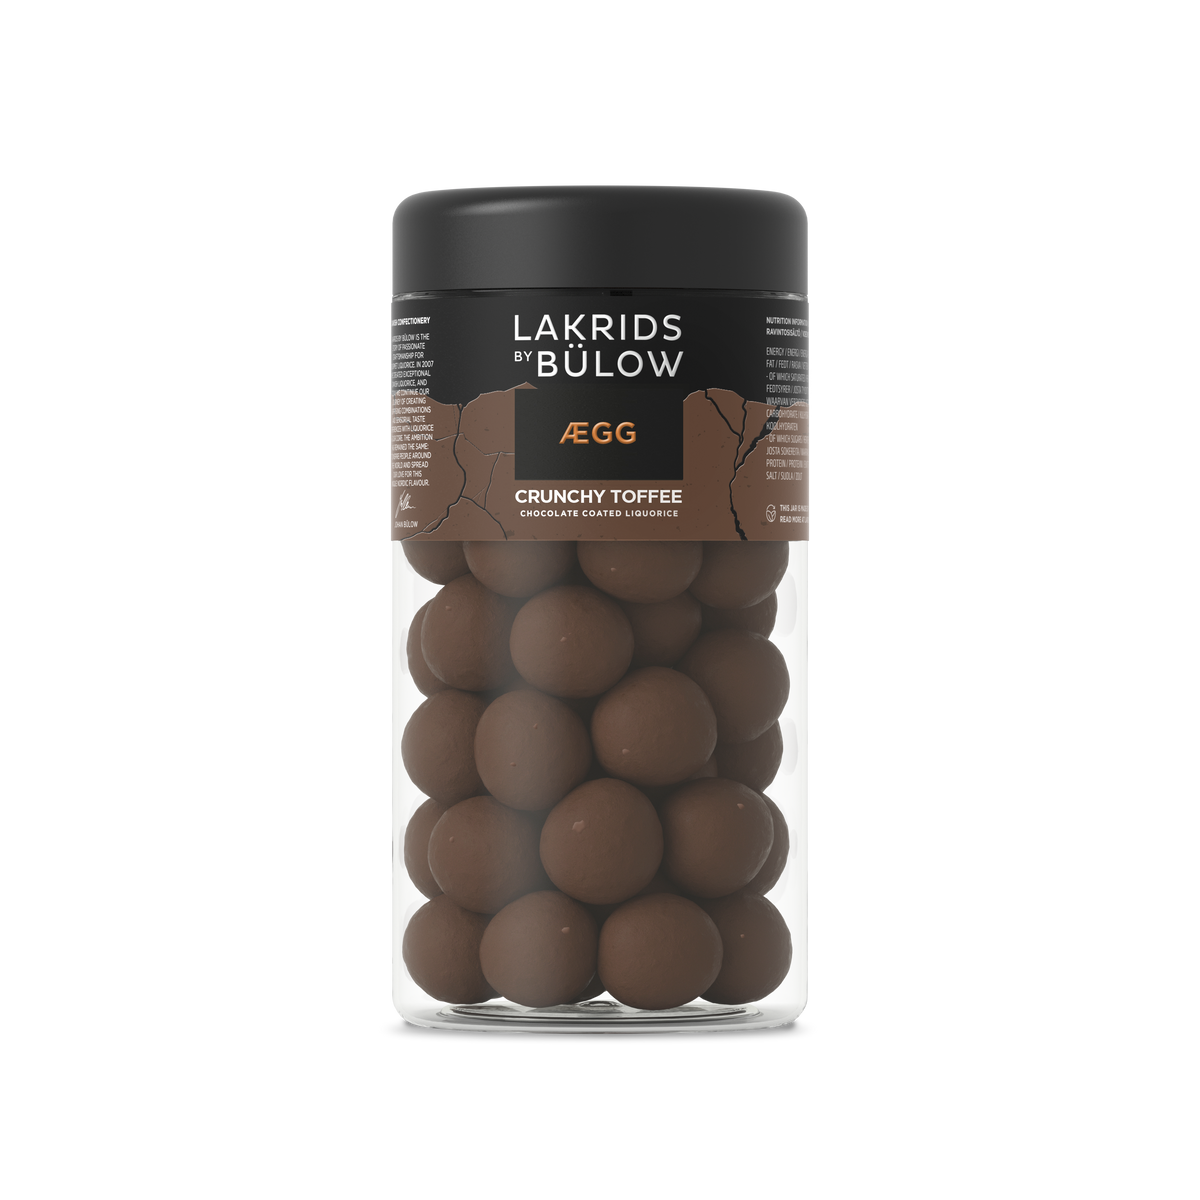 LAKRIDS - CRUNCHY TOFFEE